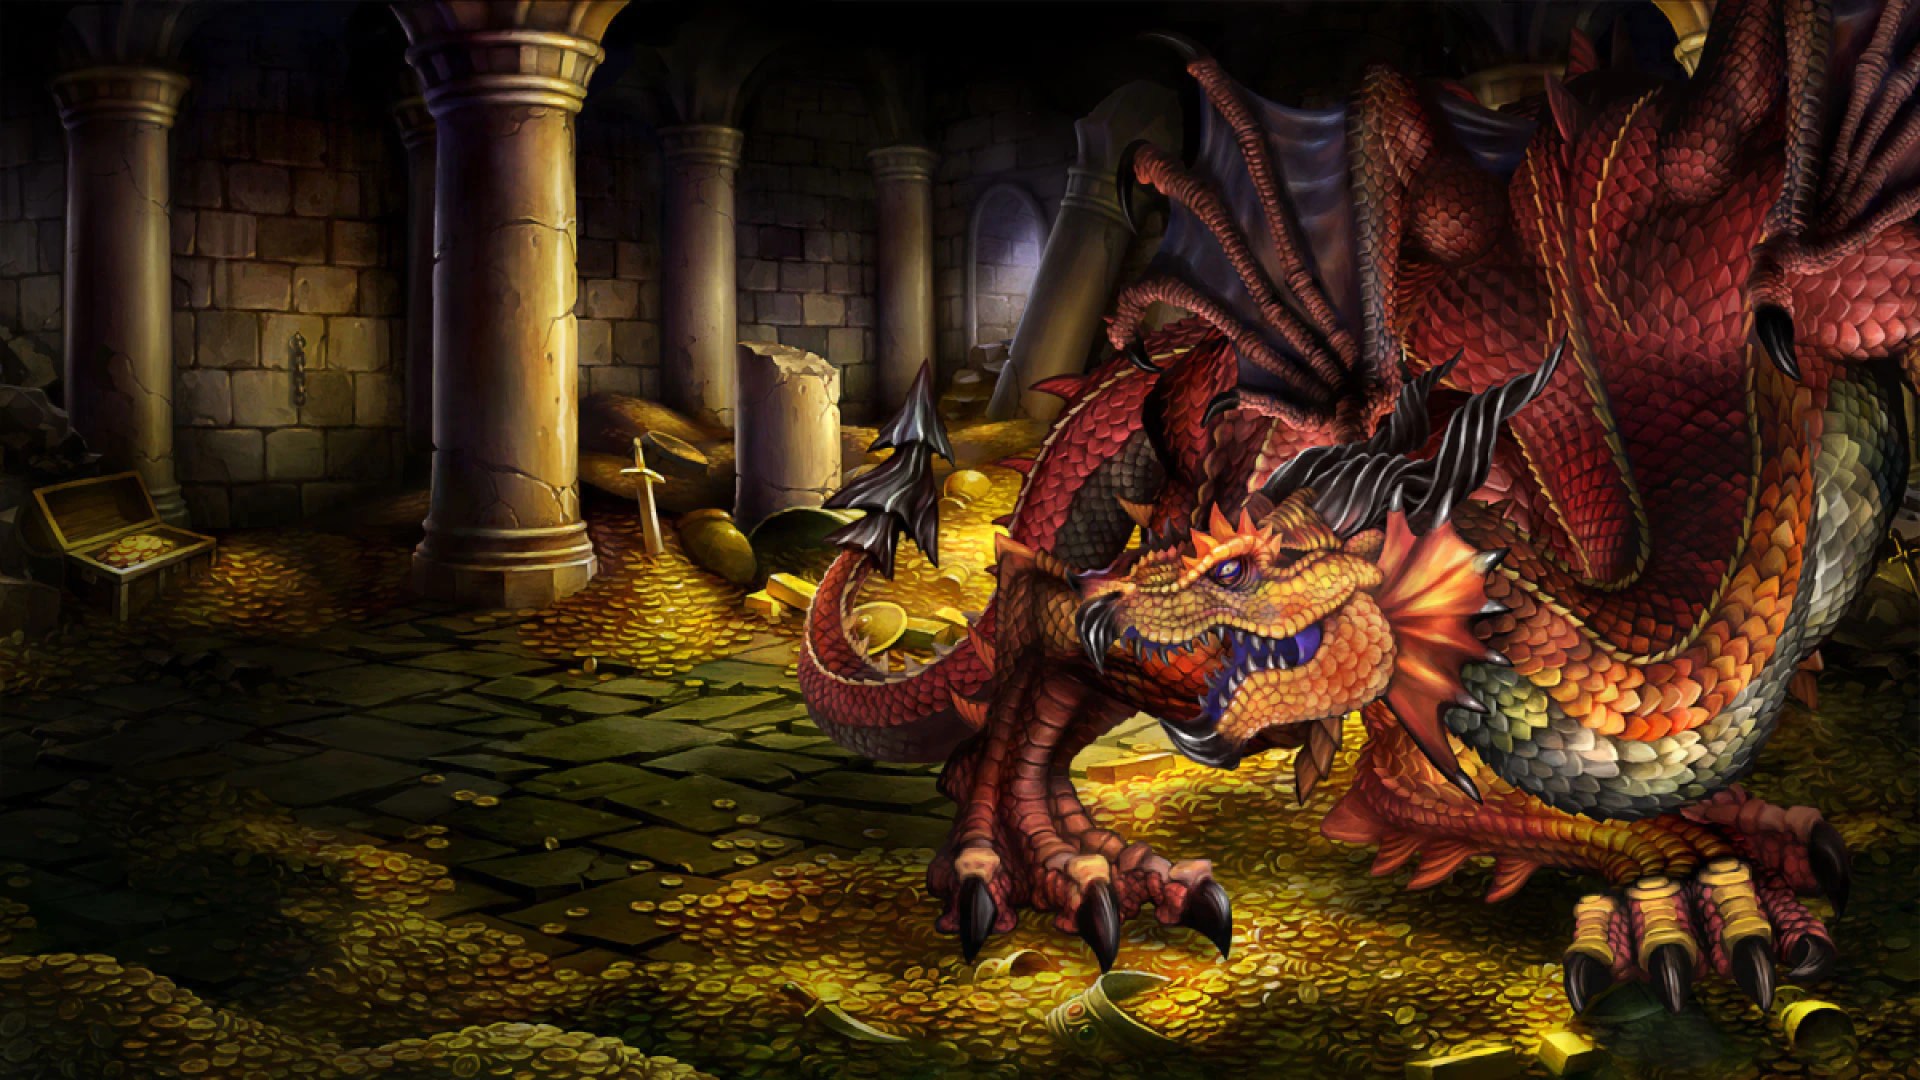 The animated dragon of "Dragon's Crown" guards in its gold horde in a castle